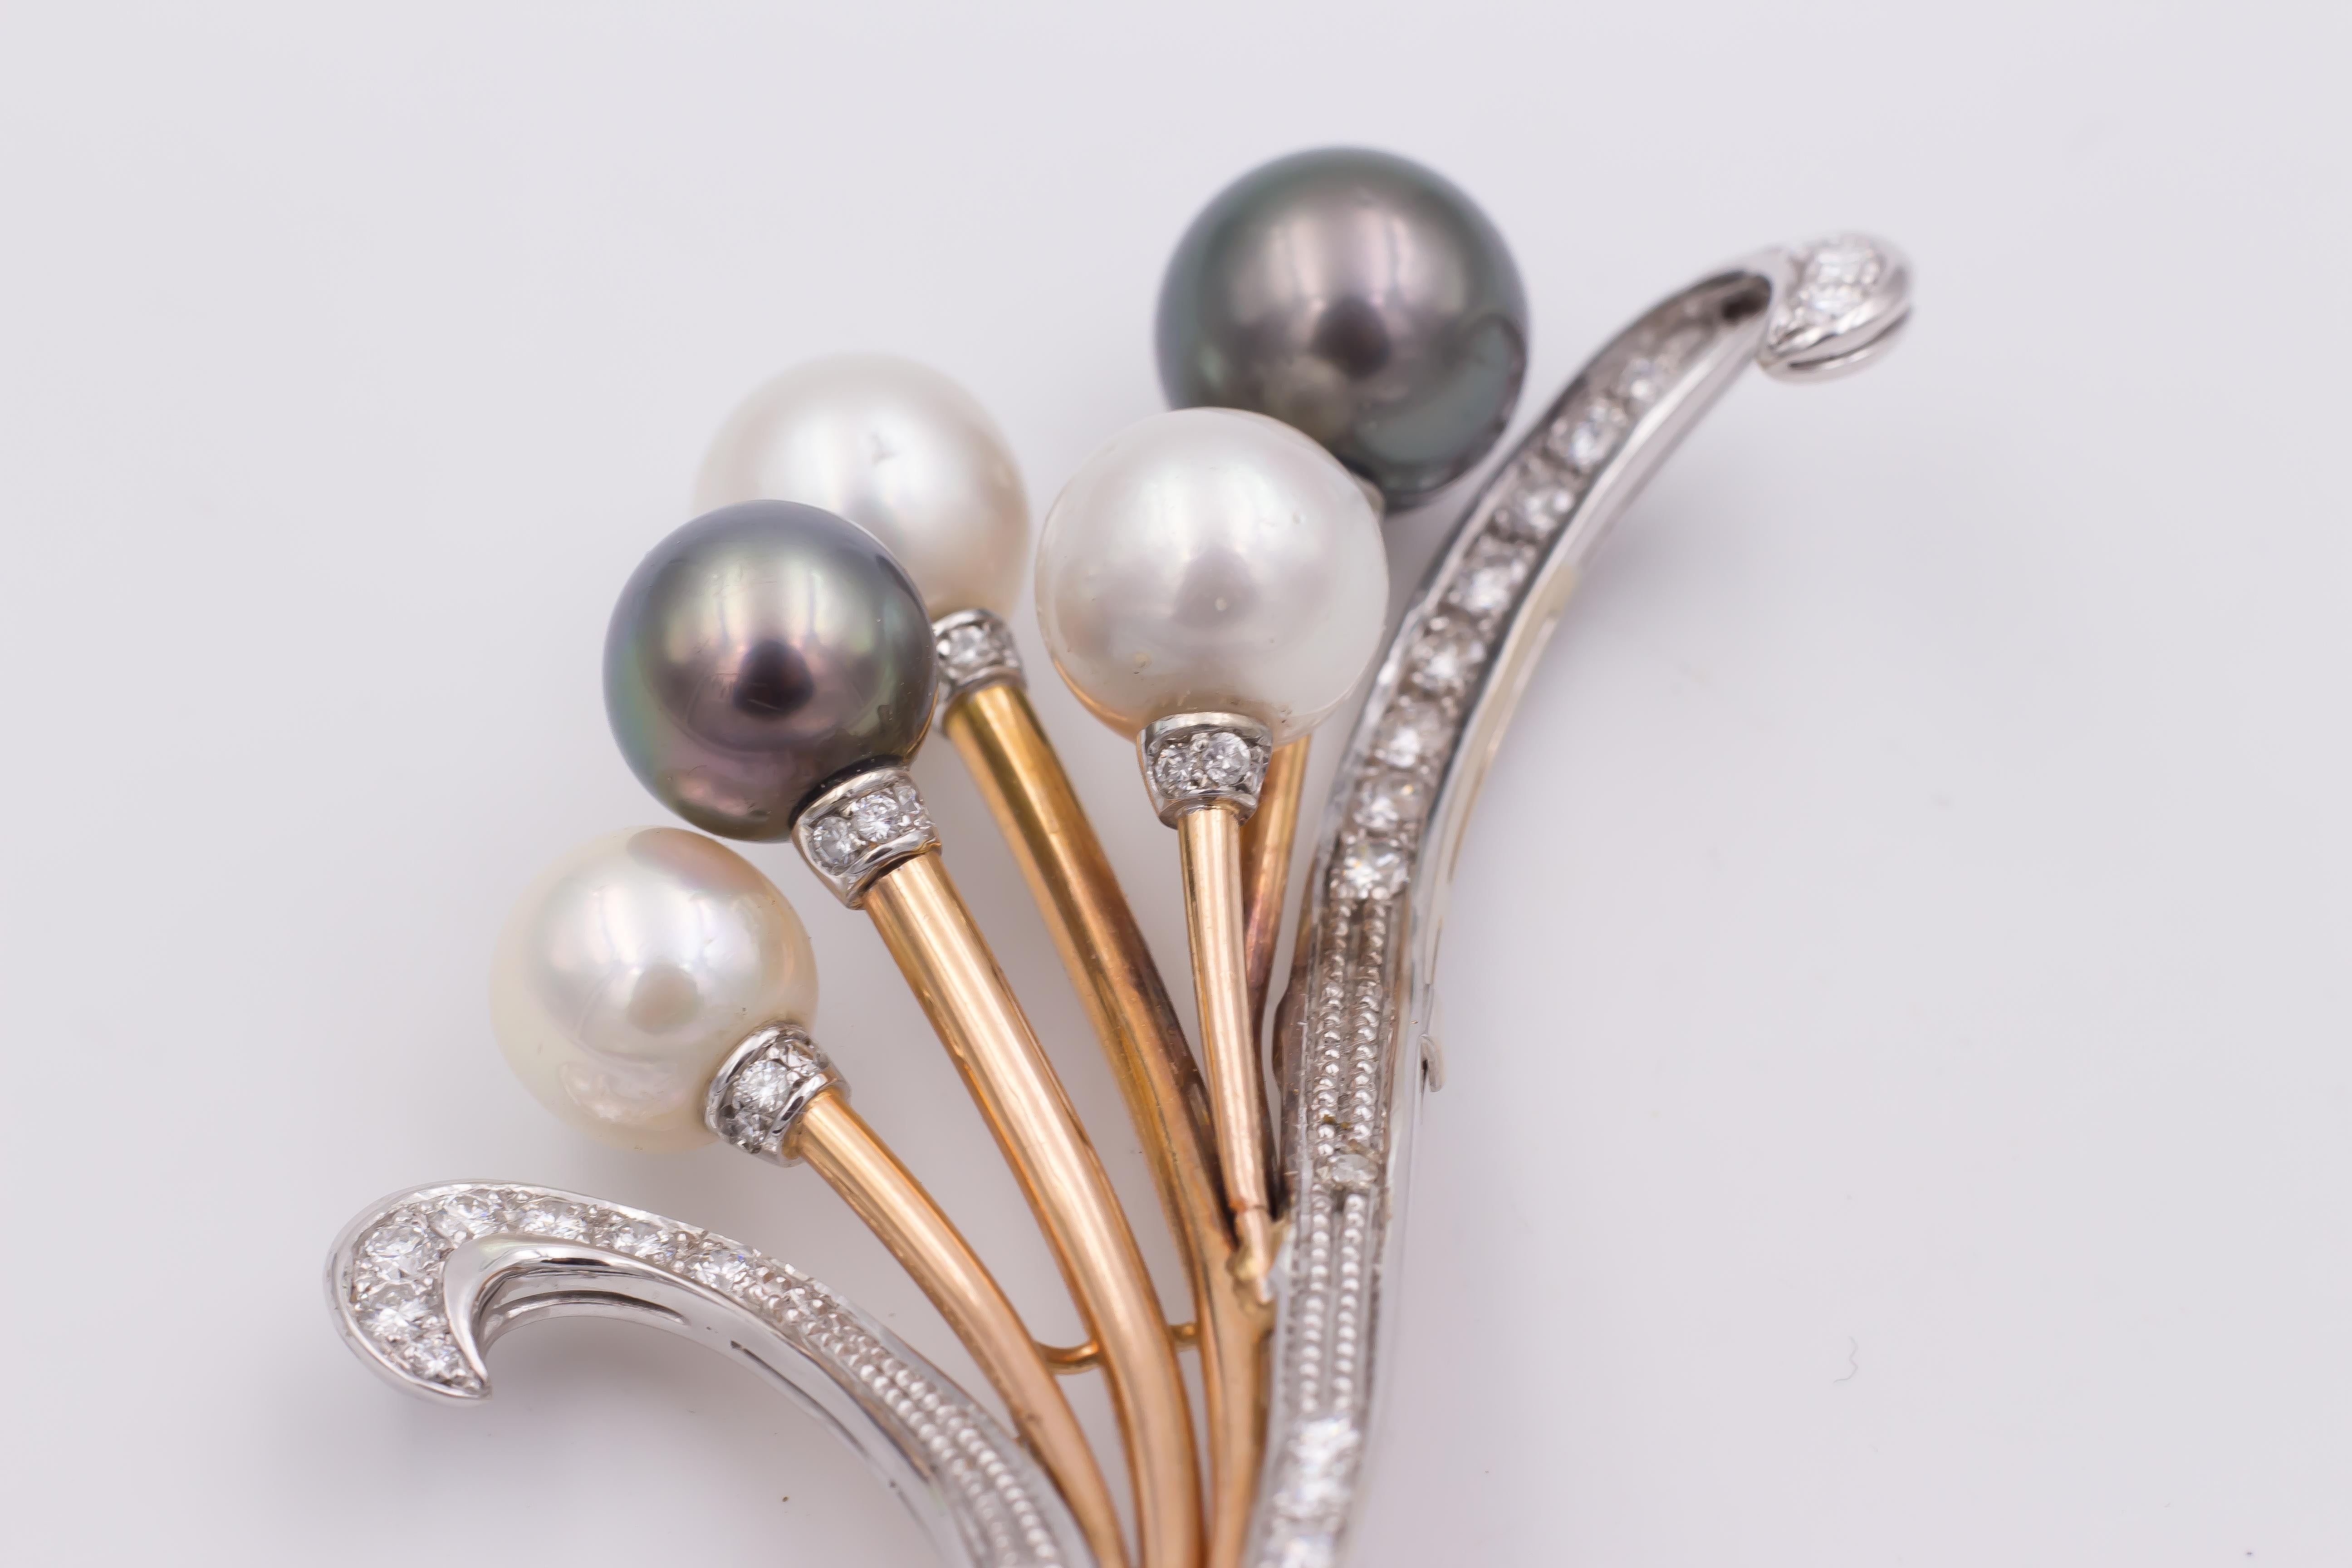 This very elegant vintage brooch has a very dynamic and lively shape: it is set with five pearls, alternating Akoya and Tahiti pearls; the brooch is also decorated with diamonds, set in a both yellow and white mount. The brooch dates from the 1960s.